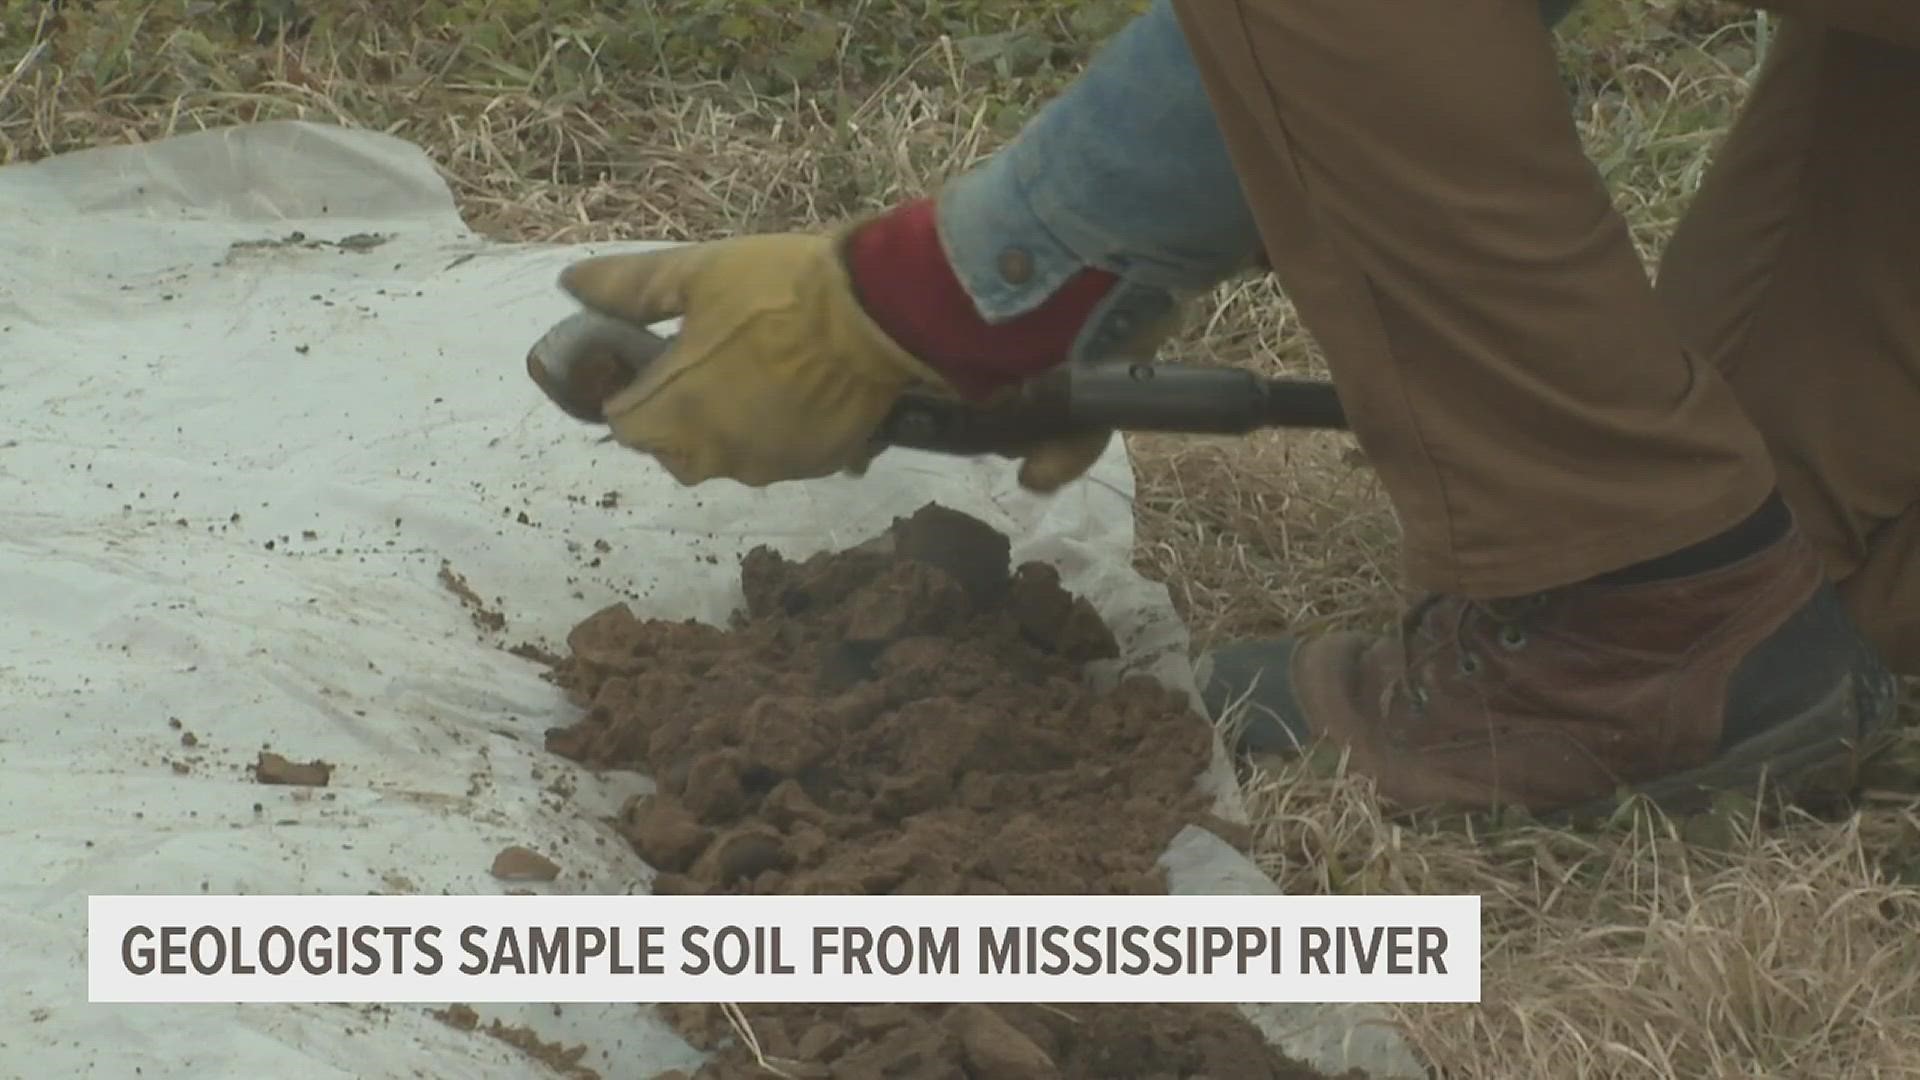 The team drilled holes in Rock Island's Watch Tower plaza for soil samples to study how the Mississippi River's flow has changed over the last 20,000 years.